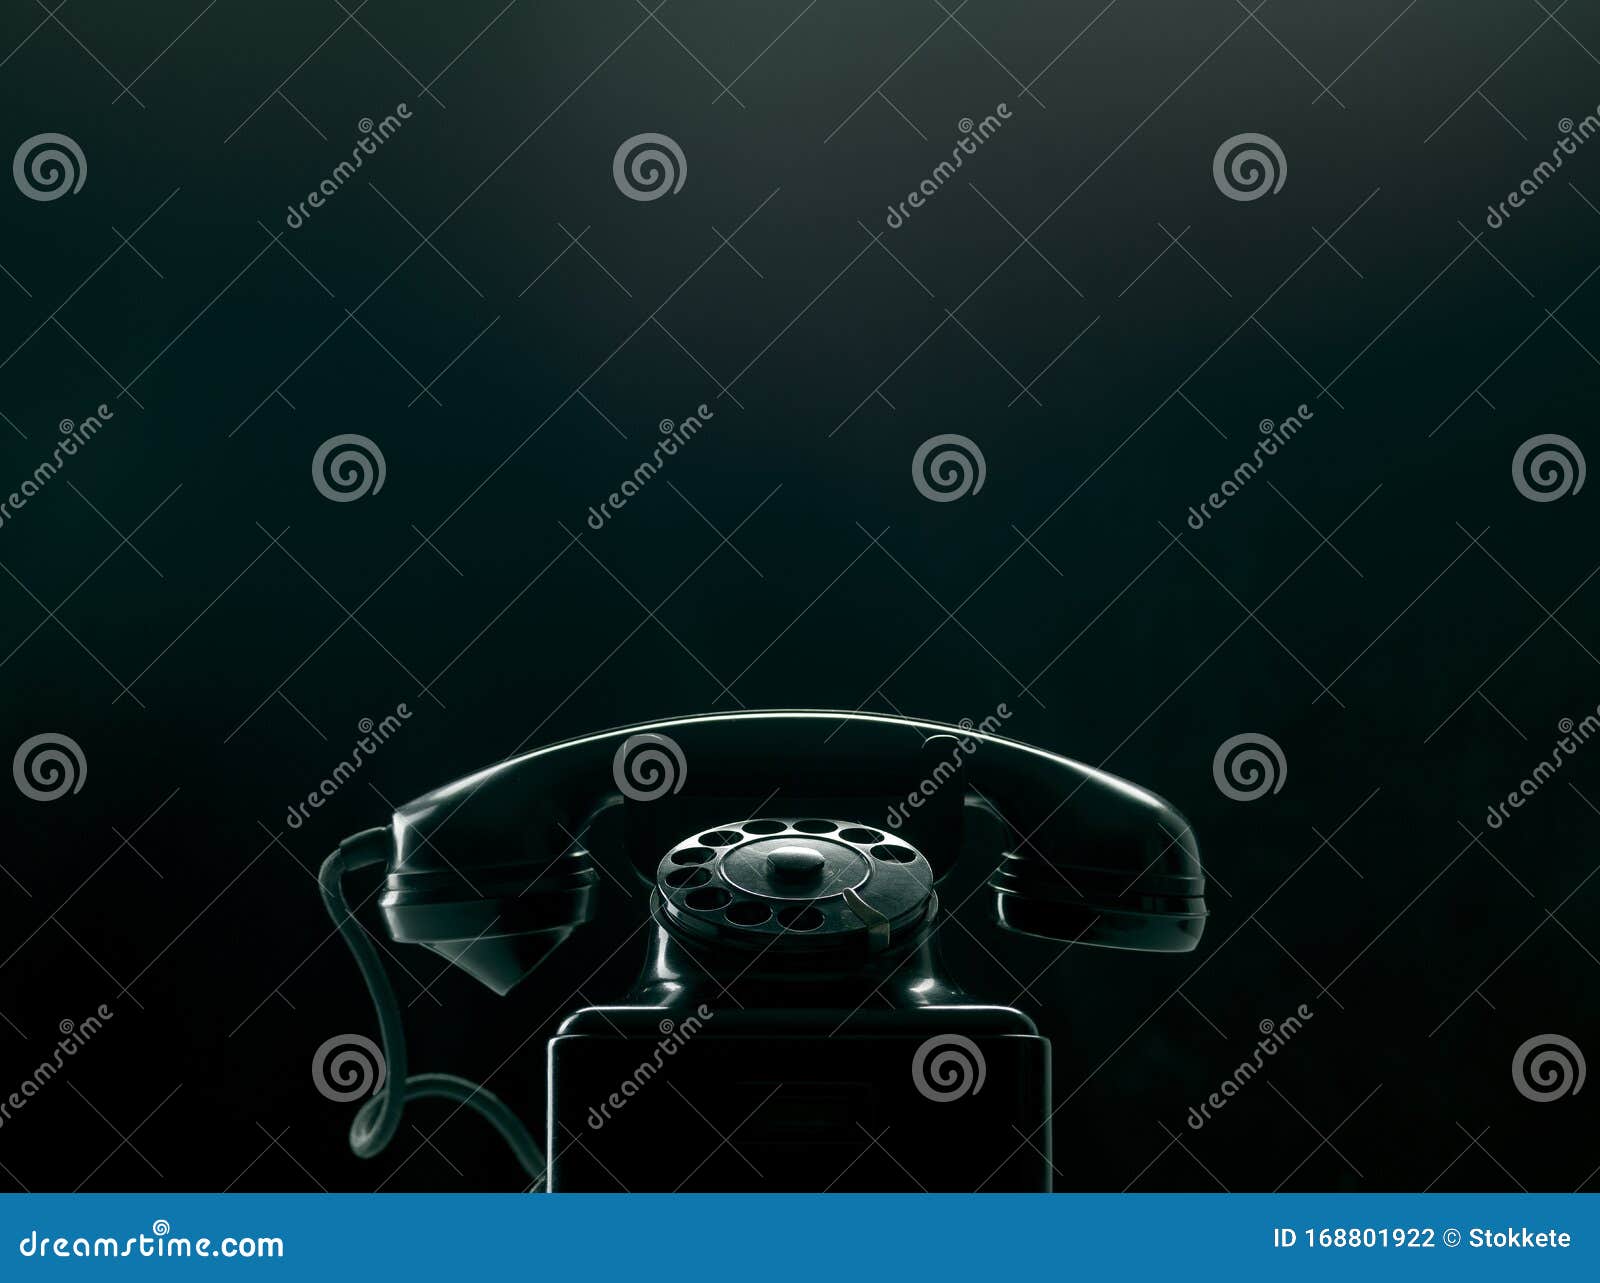 vintage rotary dial phone